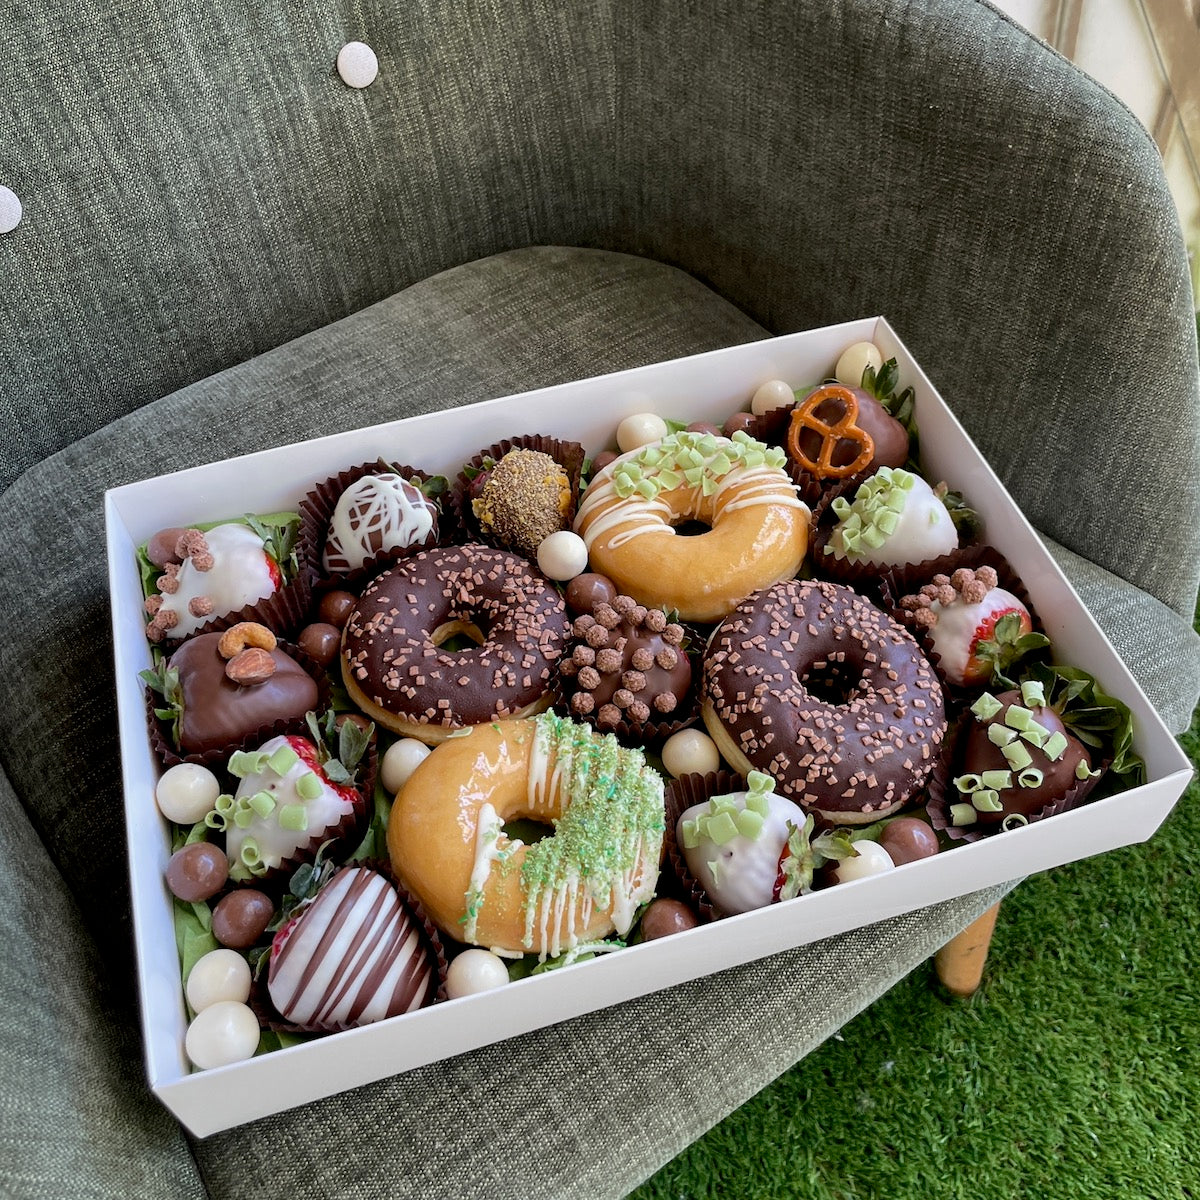 Indulge in our heavenly donuts & chocolate strawberries. A delightful dessert box for any occasion. Order now!